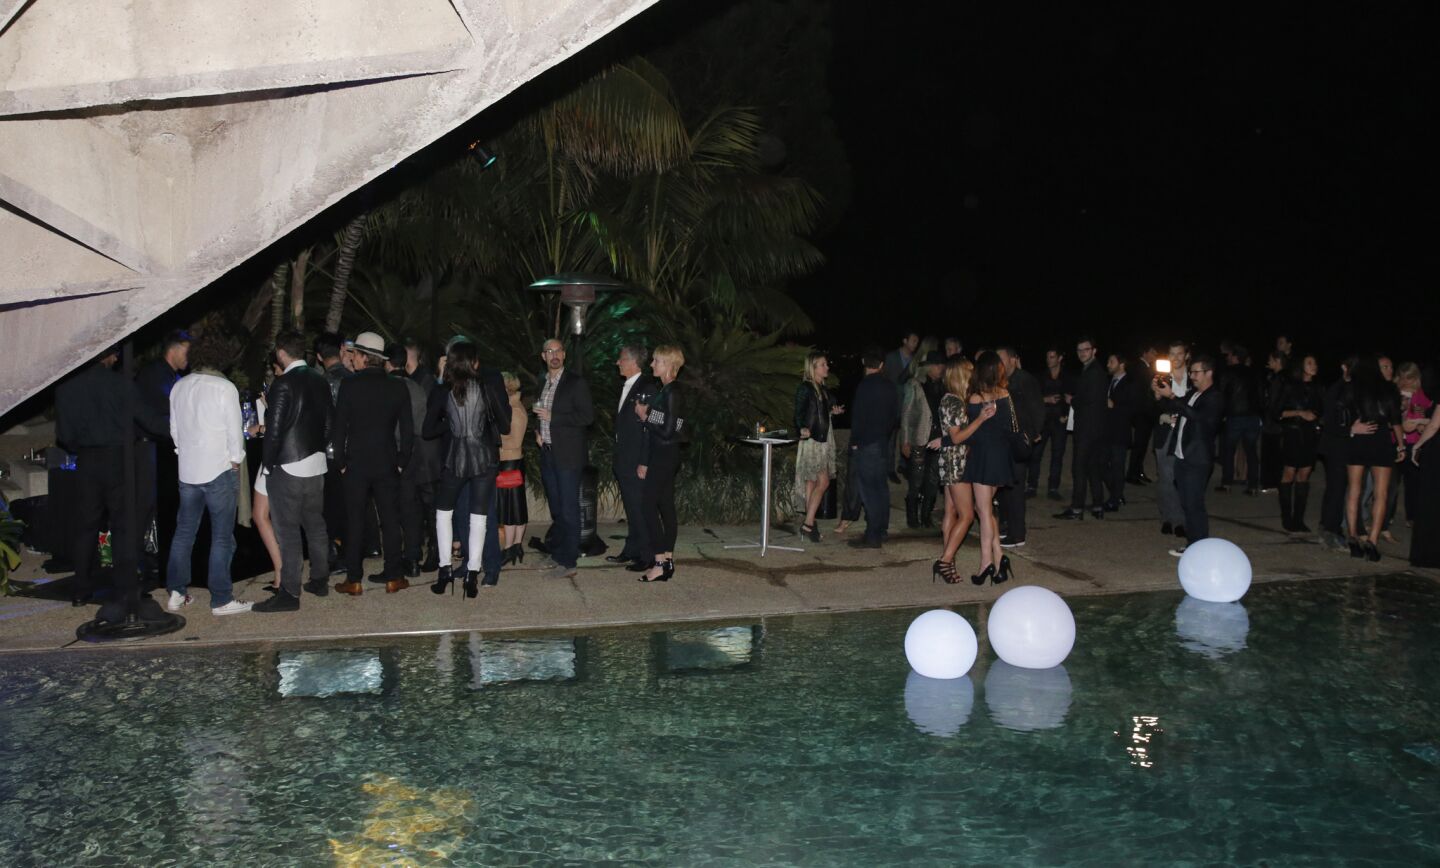 Guests partied around the house and alongside the pool into the night.